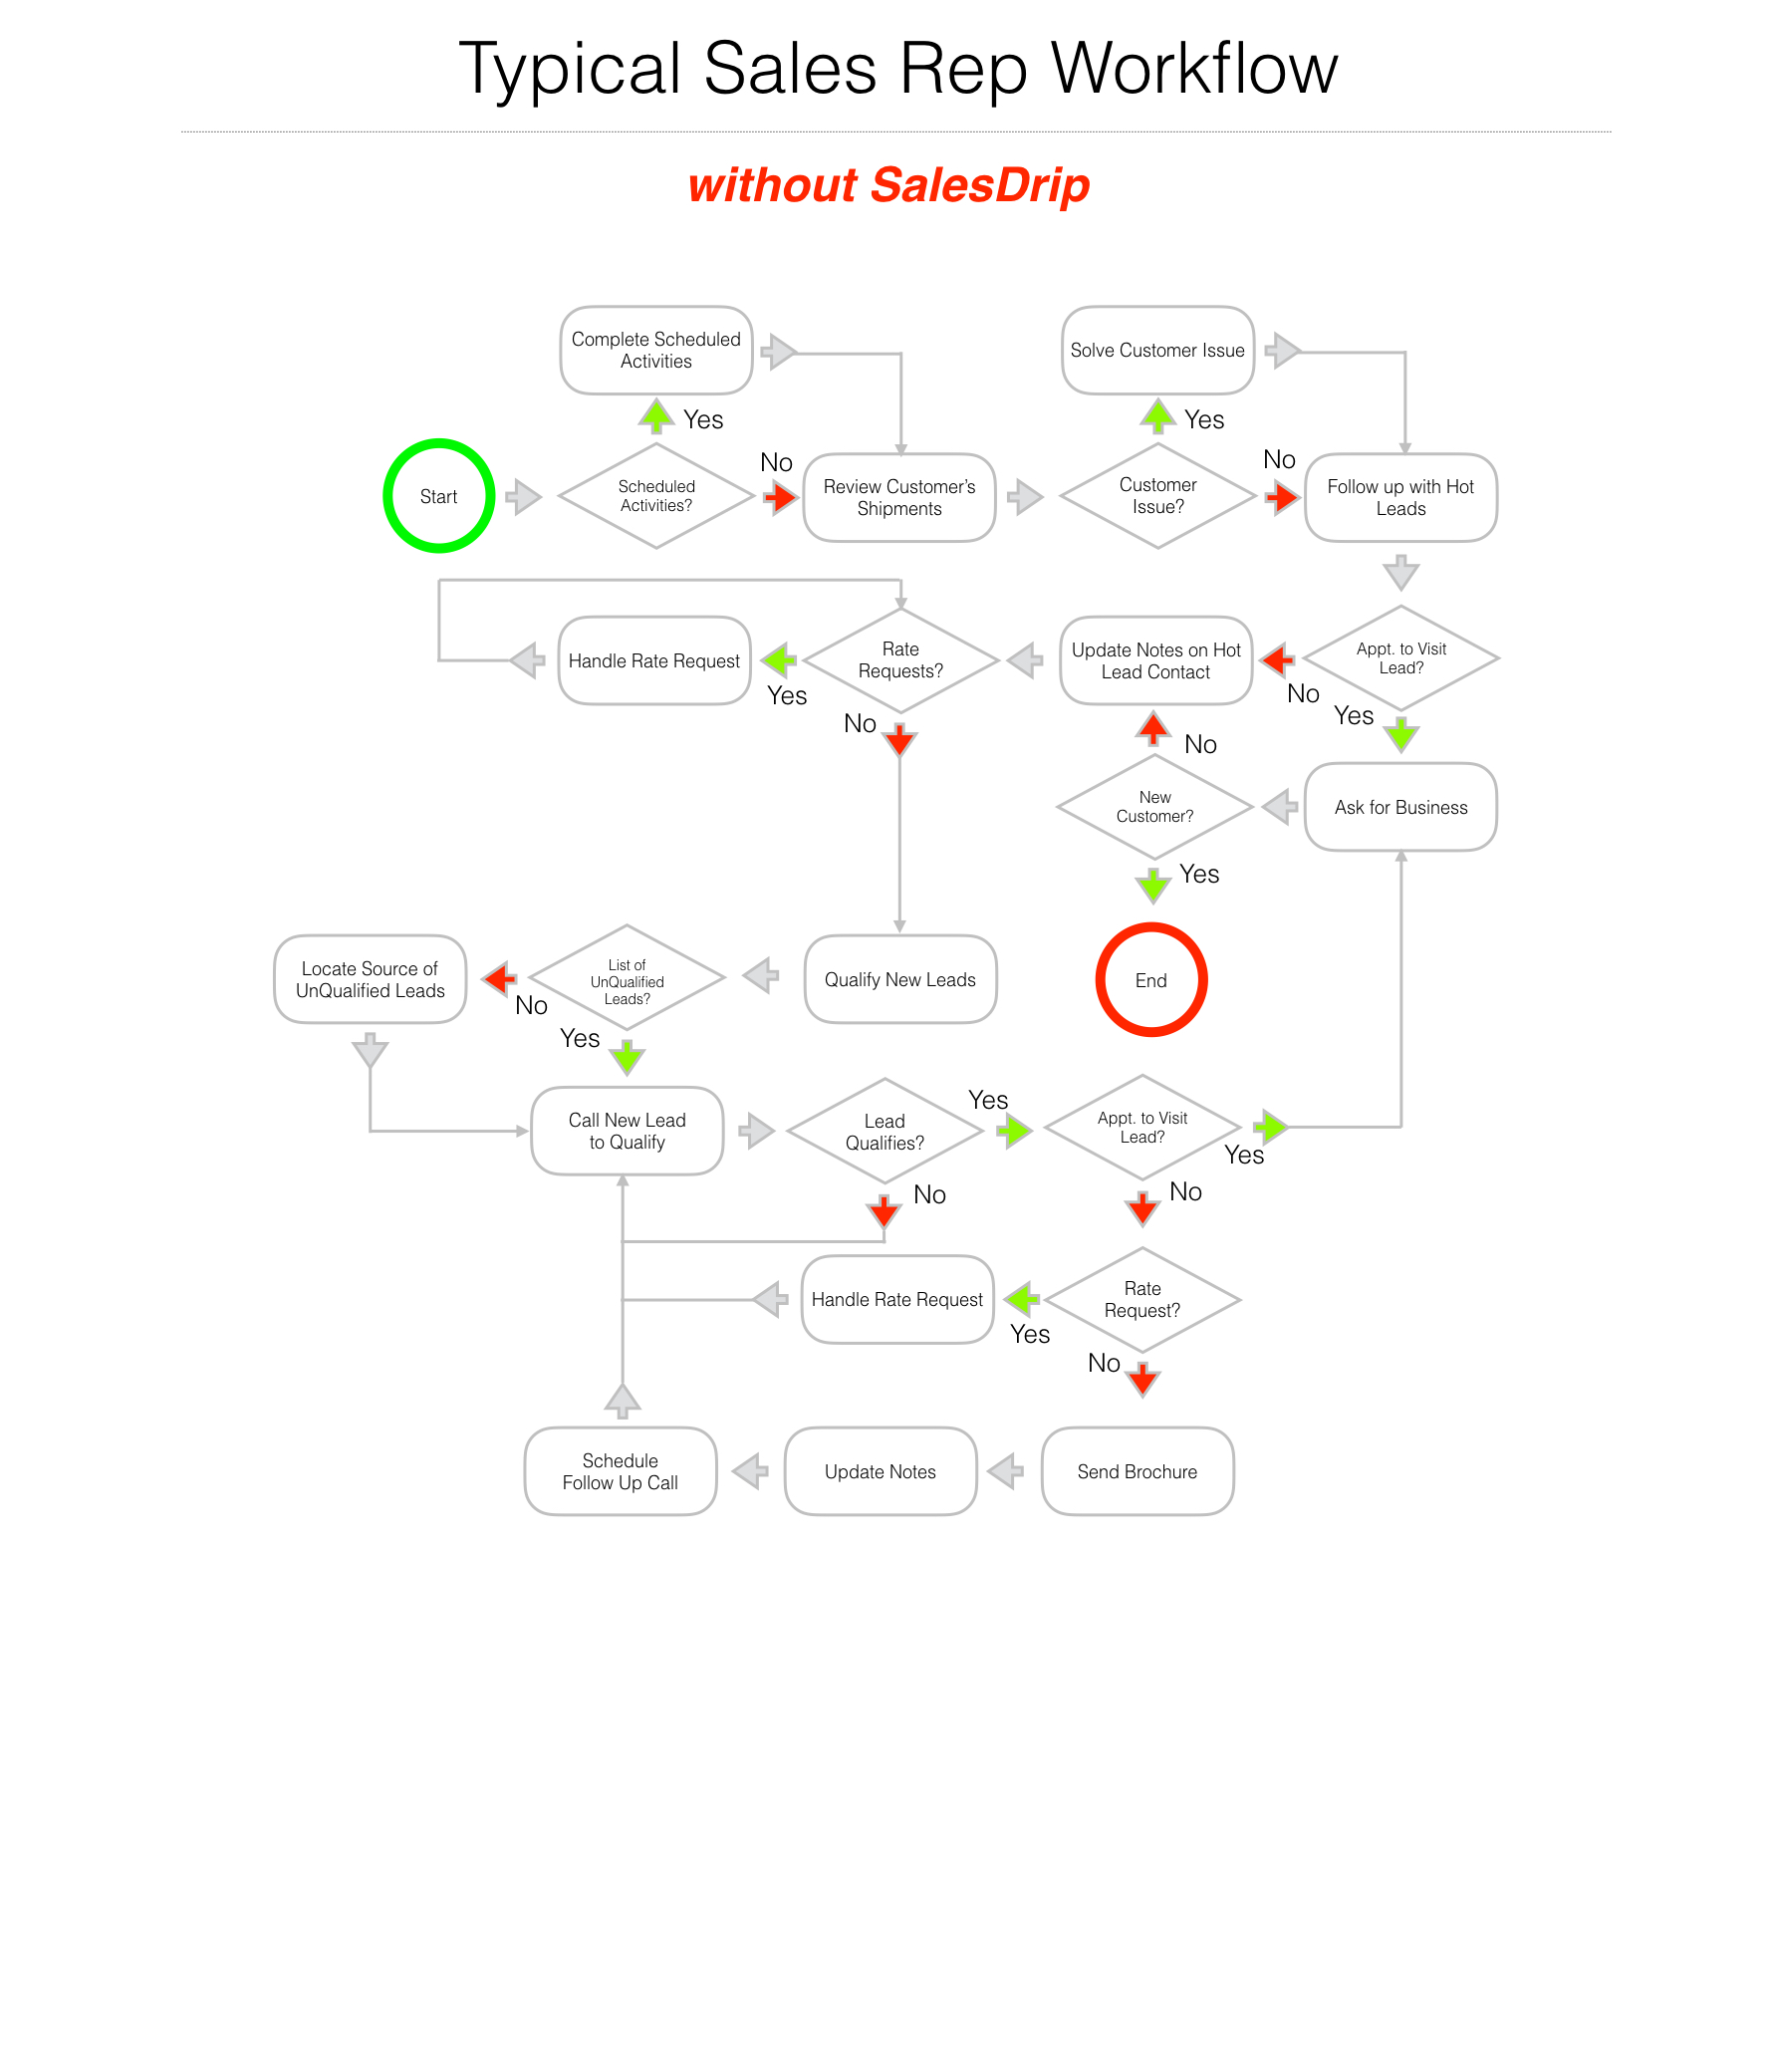 Sales Rep Flowchart without SalesDrip